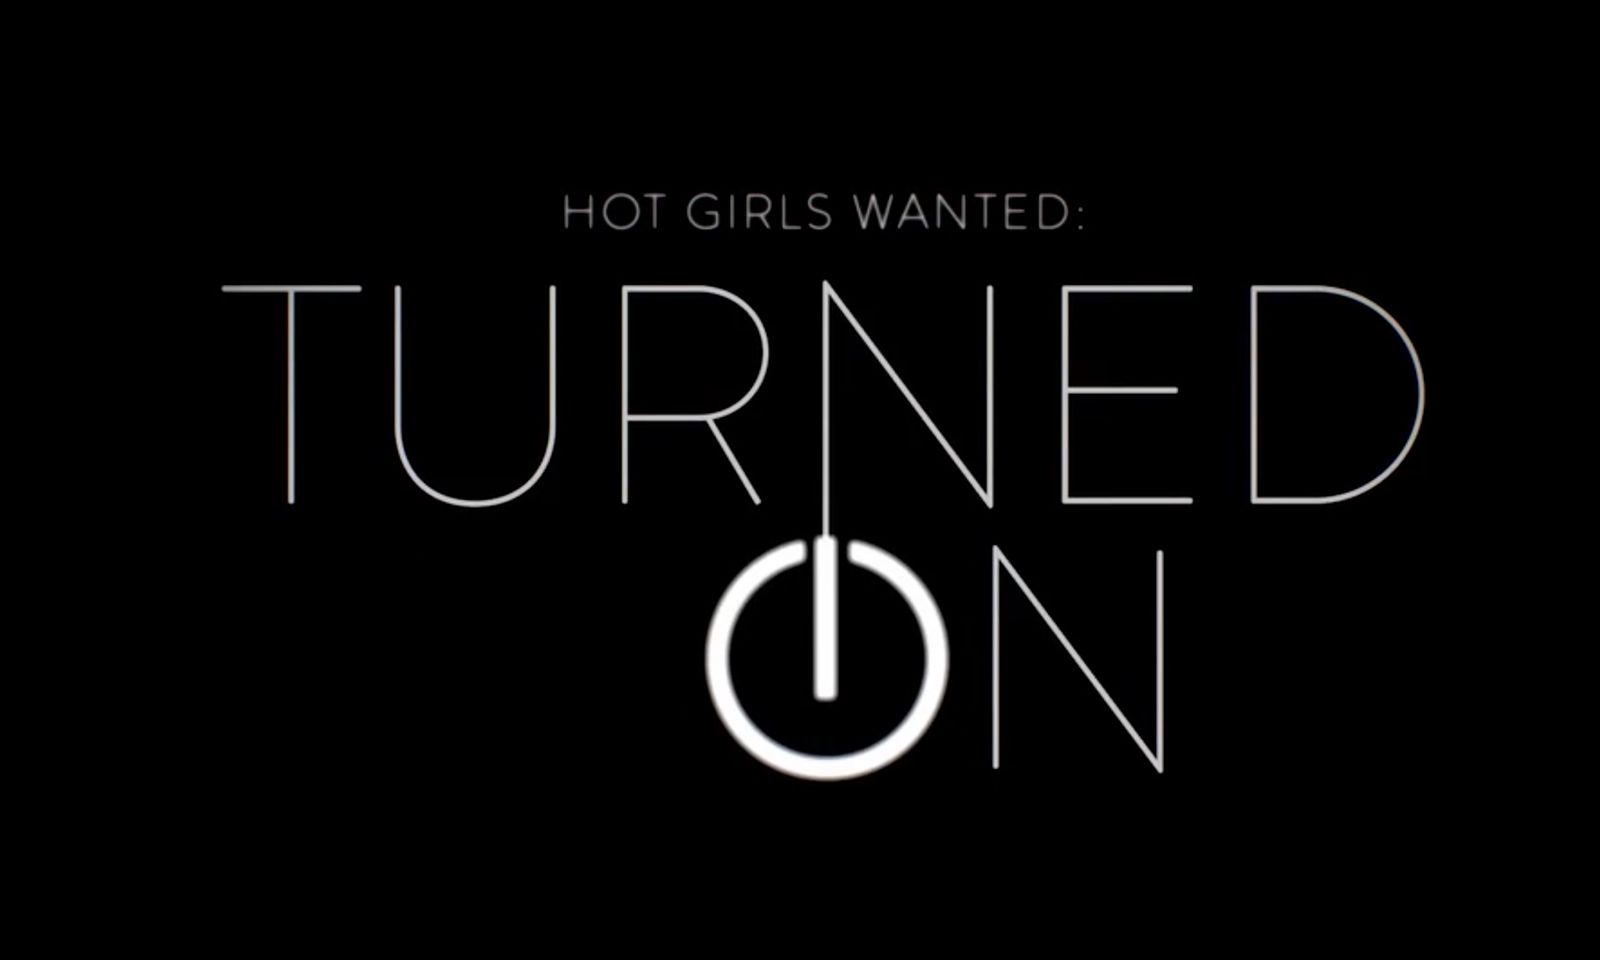 'Hot Girls Wanted': Turned Off—The Industry Responds